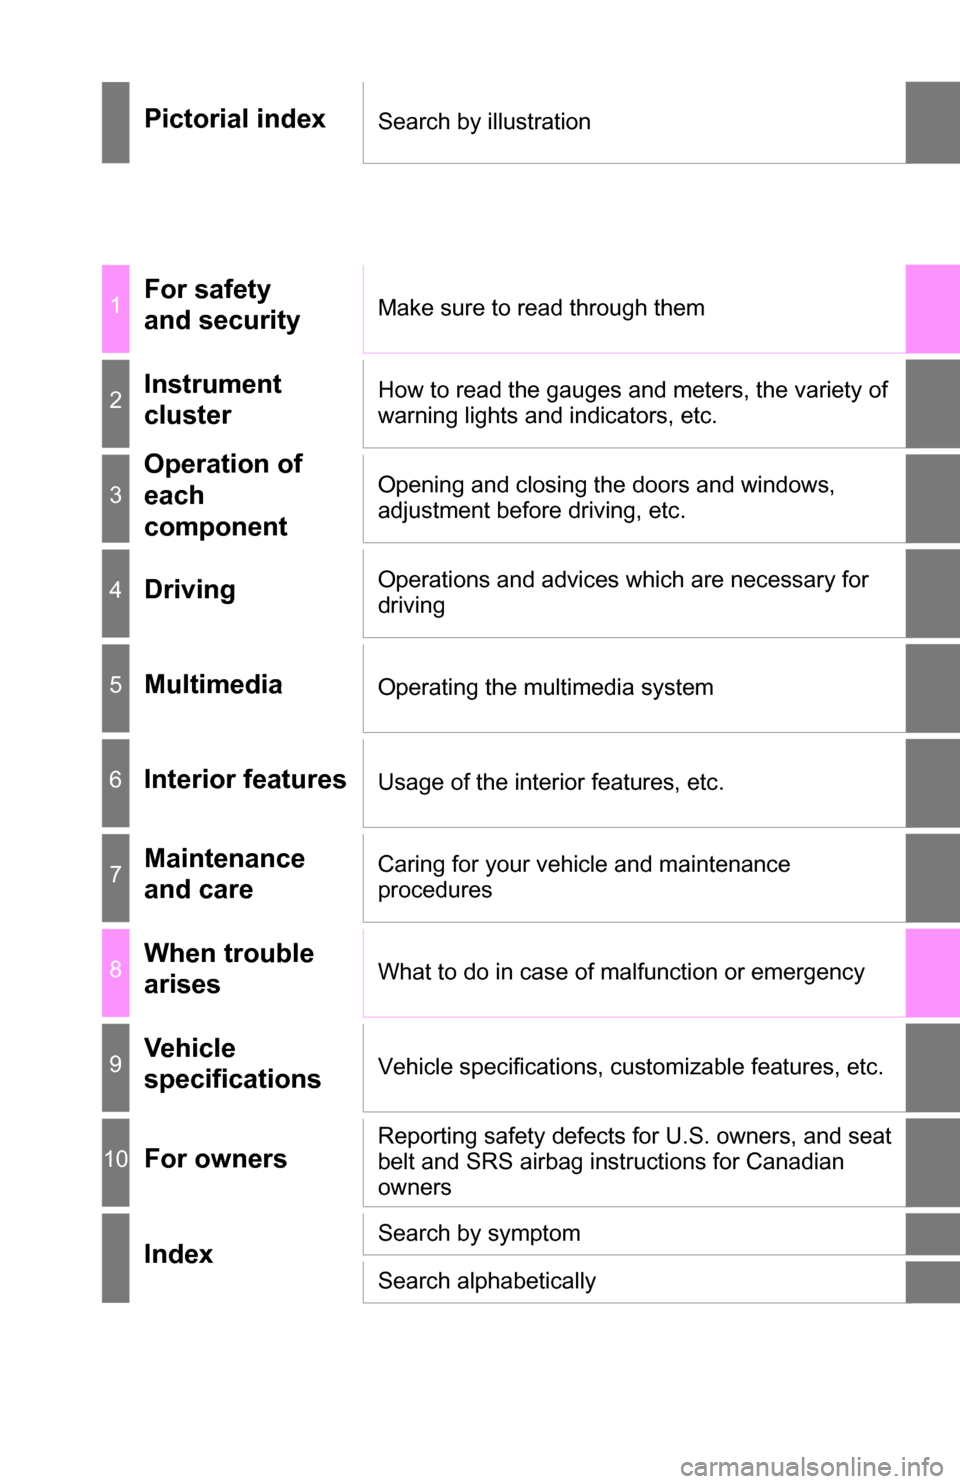 TOYOTA TUNDRA 2016 2.G Owners Manual Pictorial indexSearch by illustration
1For safety 
and securityMake sure to read through them
2Instrument 
clusterHow to read the gauges and meters, the variety of 
warning lights and indicators, etc.